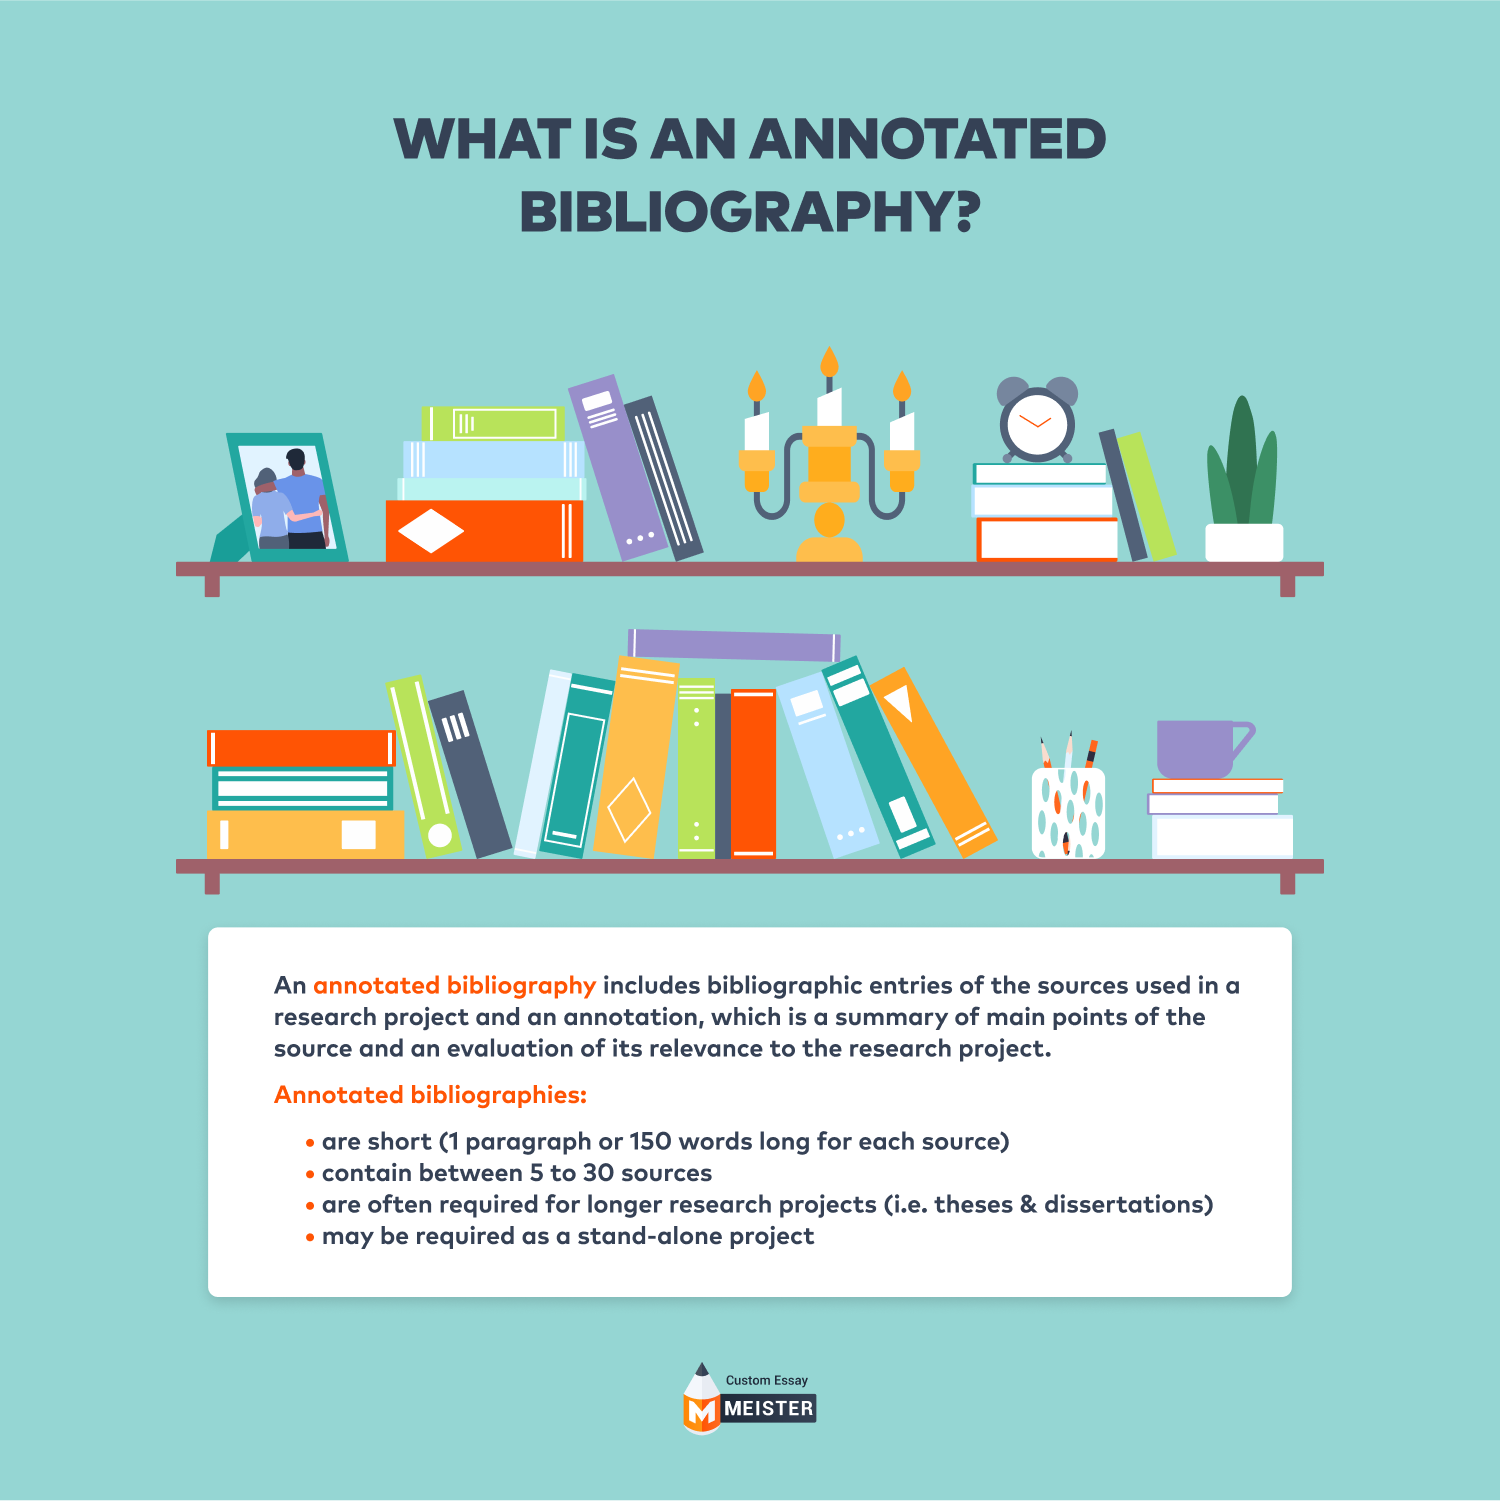 how is a literature review different from an annotated bibliography